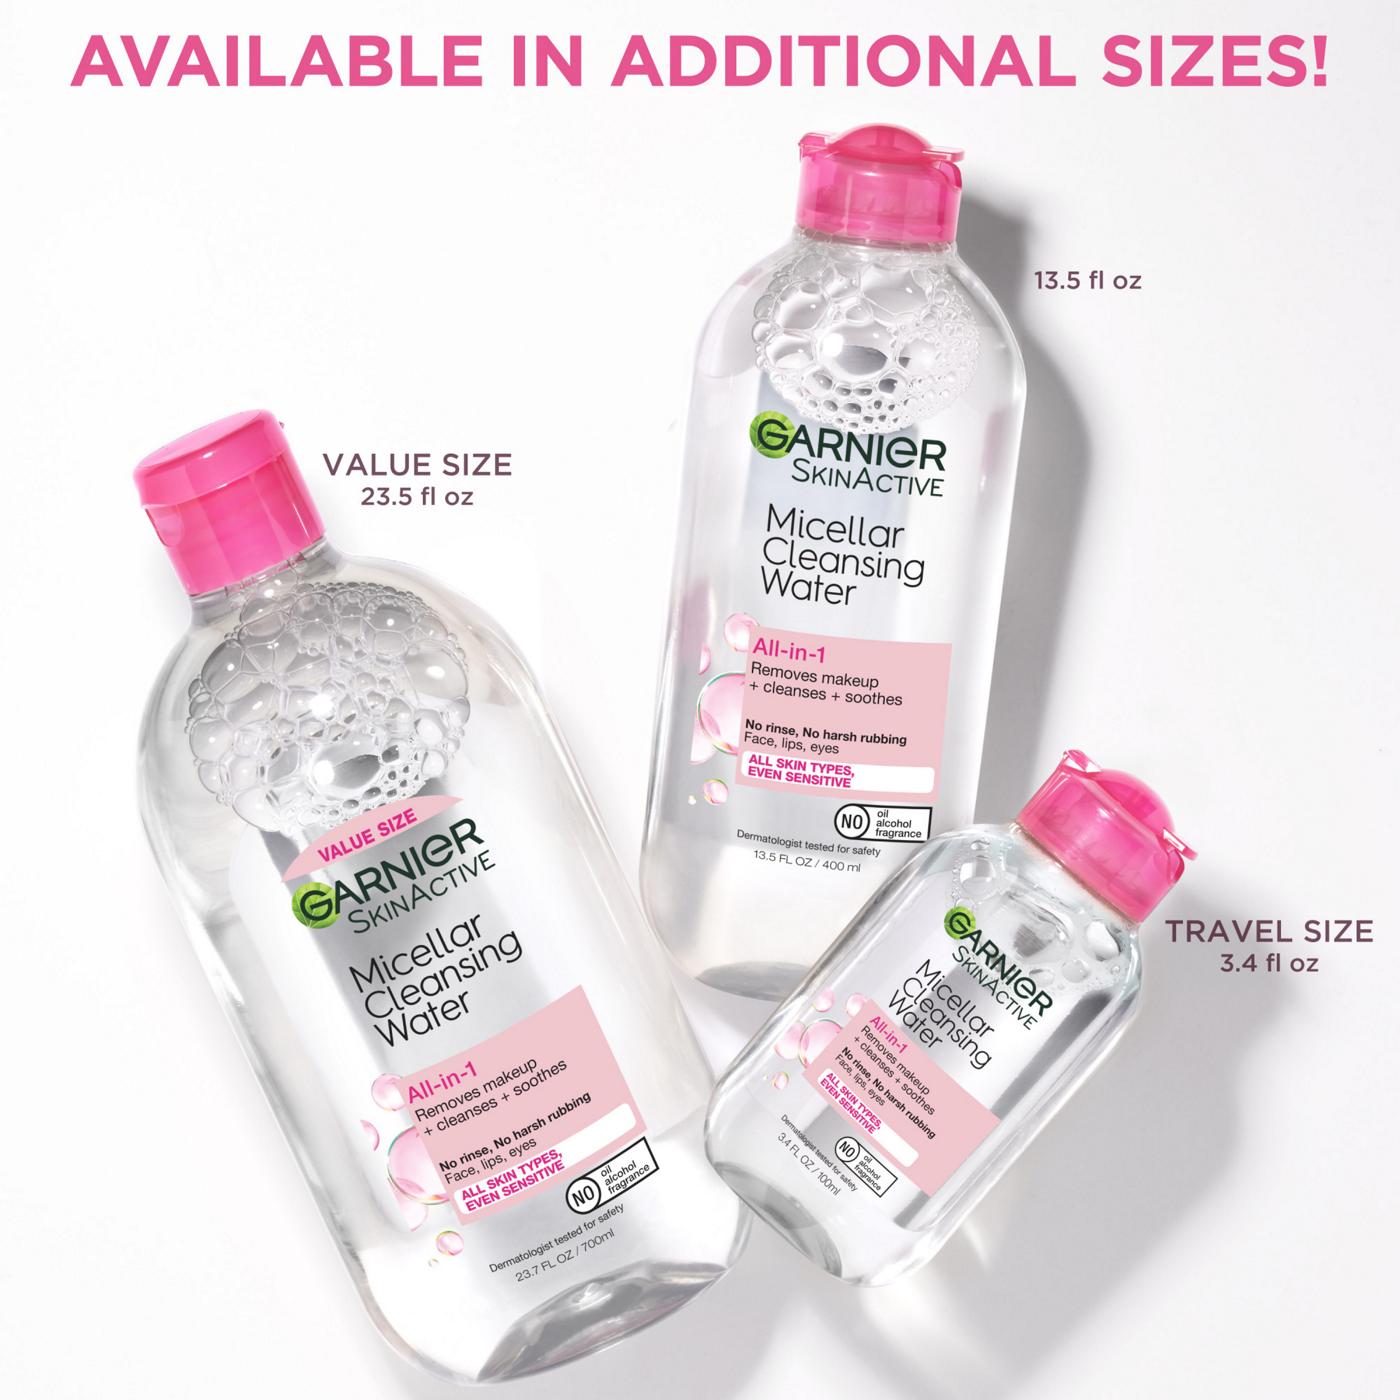 Garnier SkinActive Micellar Cleansing Water, For All Skin Types; image 11 of 11